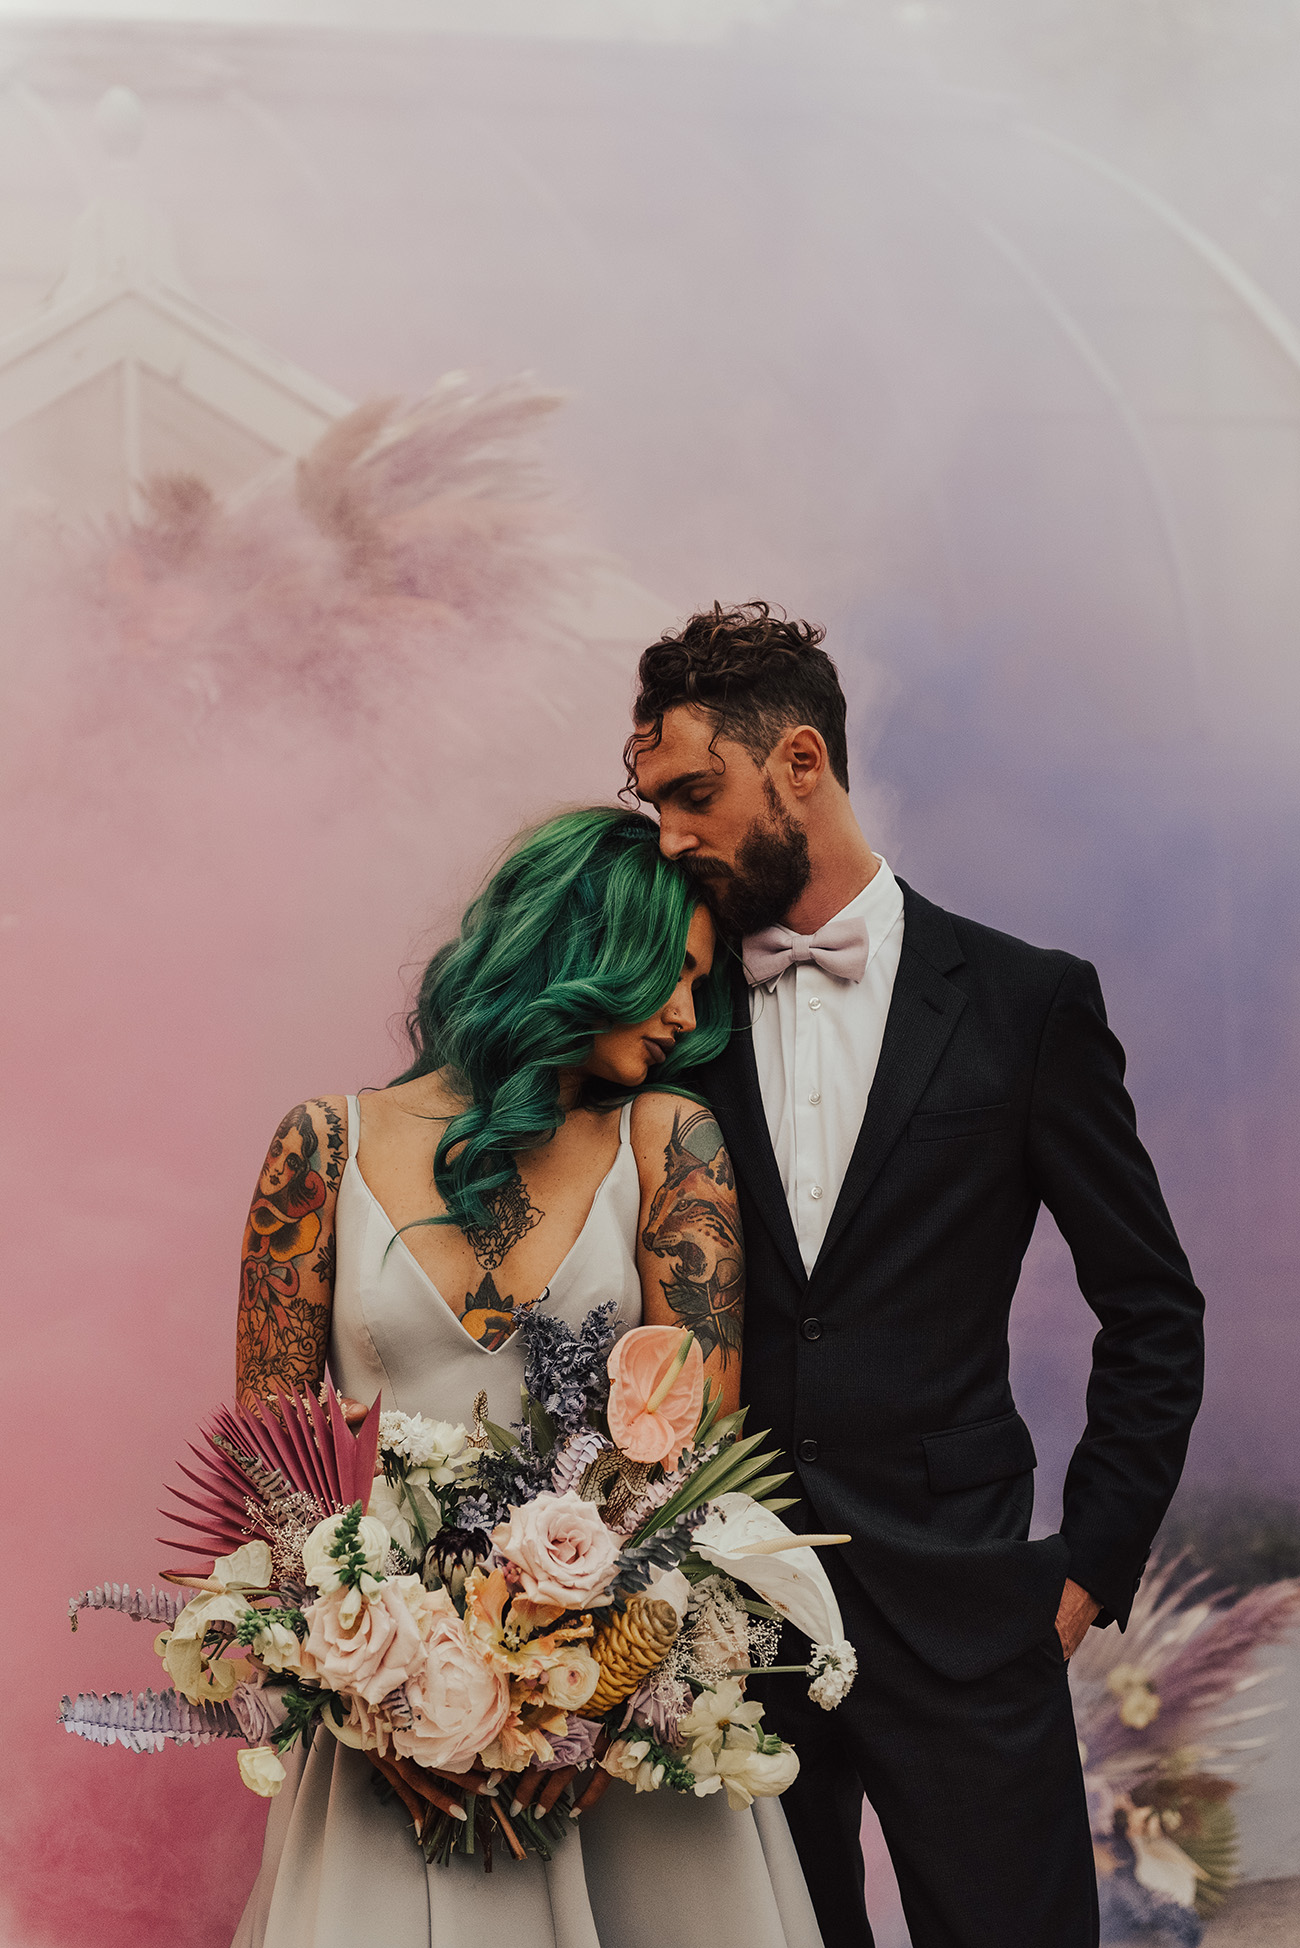 bring a romantic pastel feel to the wedding portraits with blush and lavender smoke in the pic